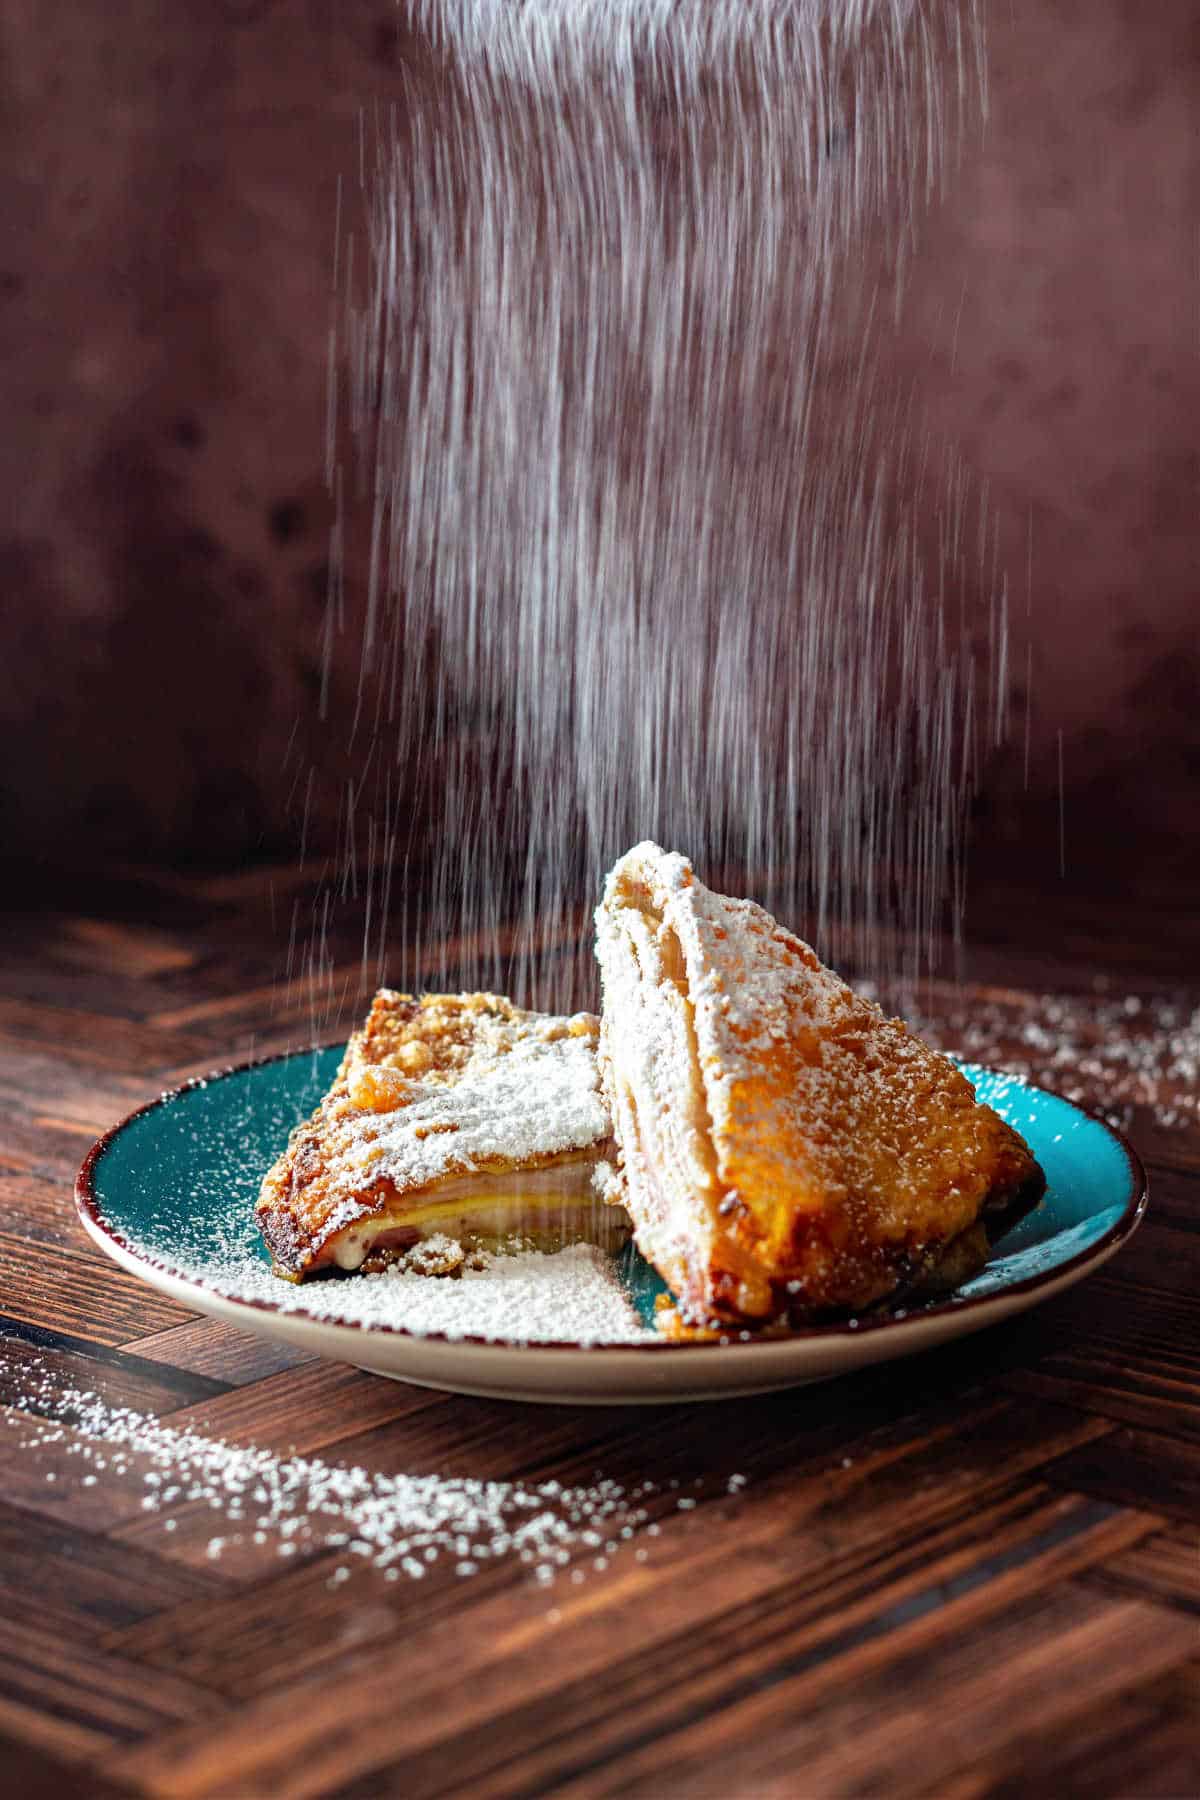 A vertical image of powdered sugar showering down over the top of a deep fried crepe filled with ham, turkey, and Swiss cheese. The crepe is cut in two and one half is leaned against the other half. Both sit on a blue plate with a brown rim.